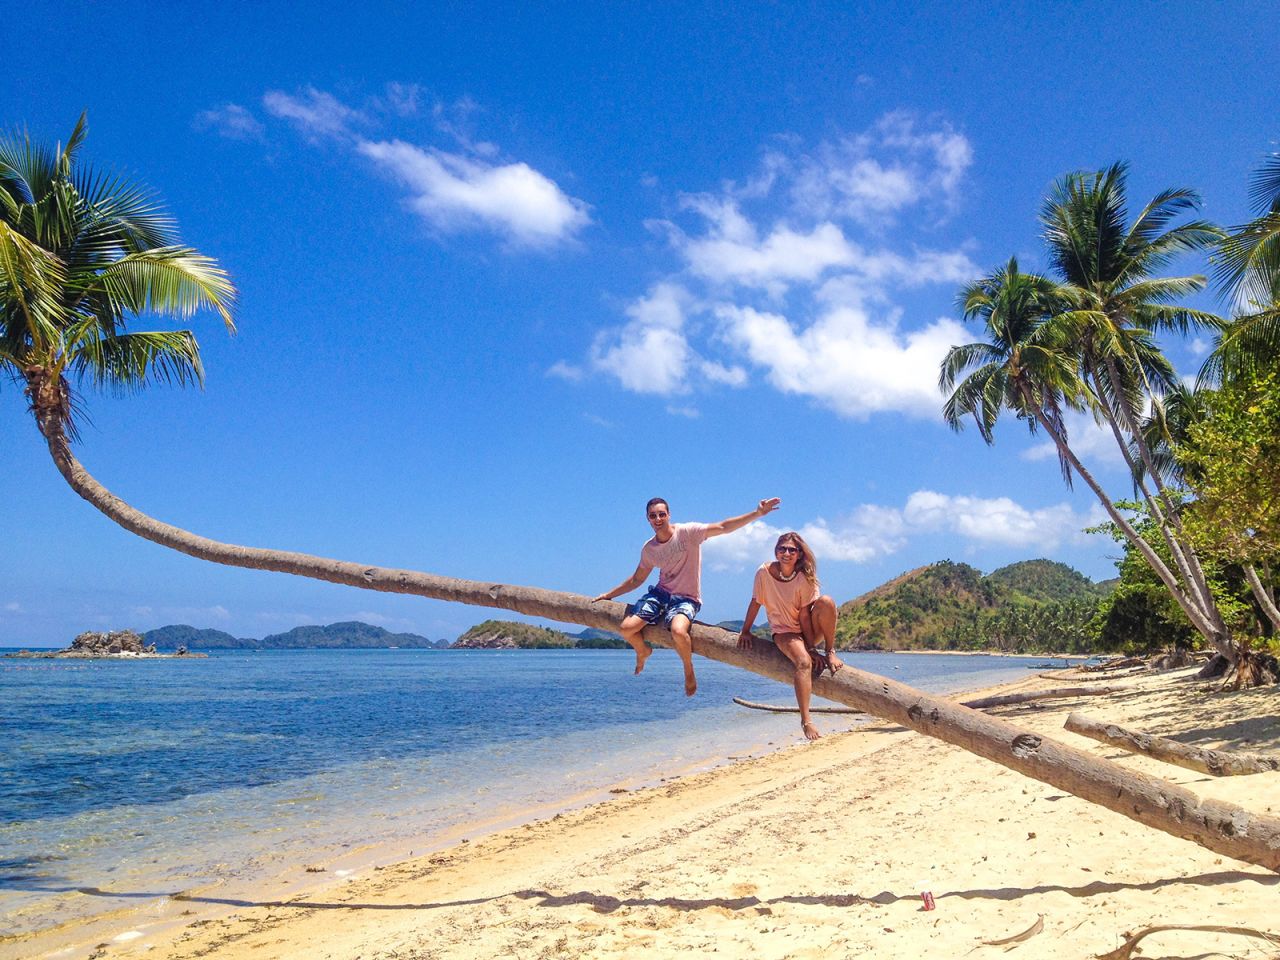 Here's a photo of Tom and Anna on one of their weekends exploring the Philippines.